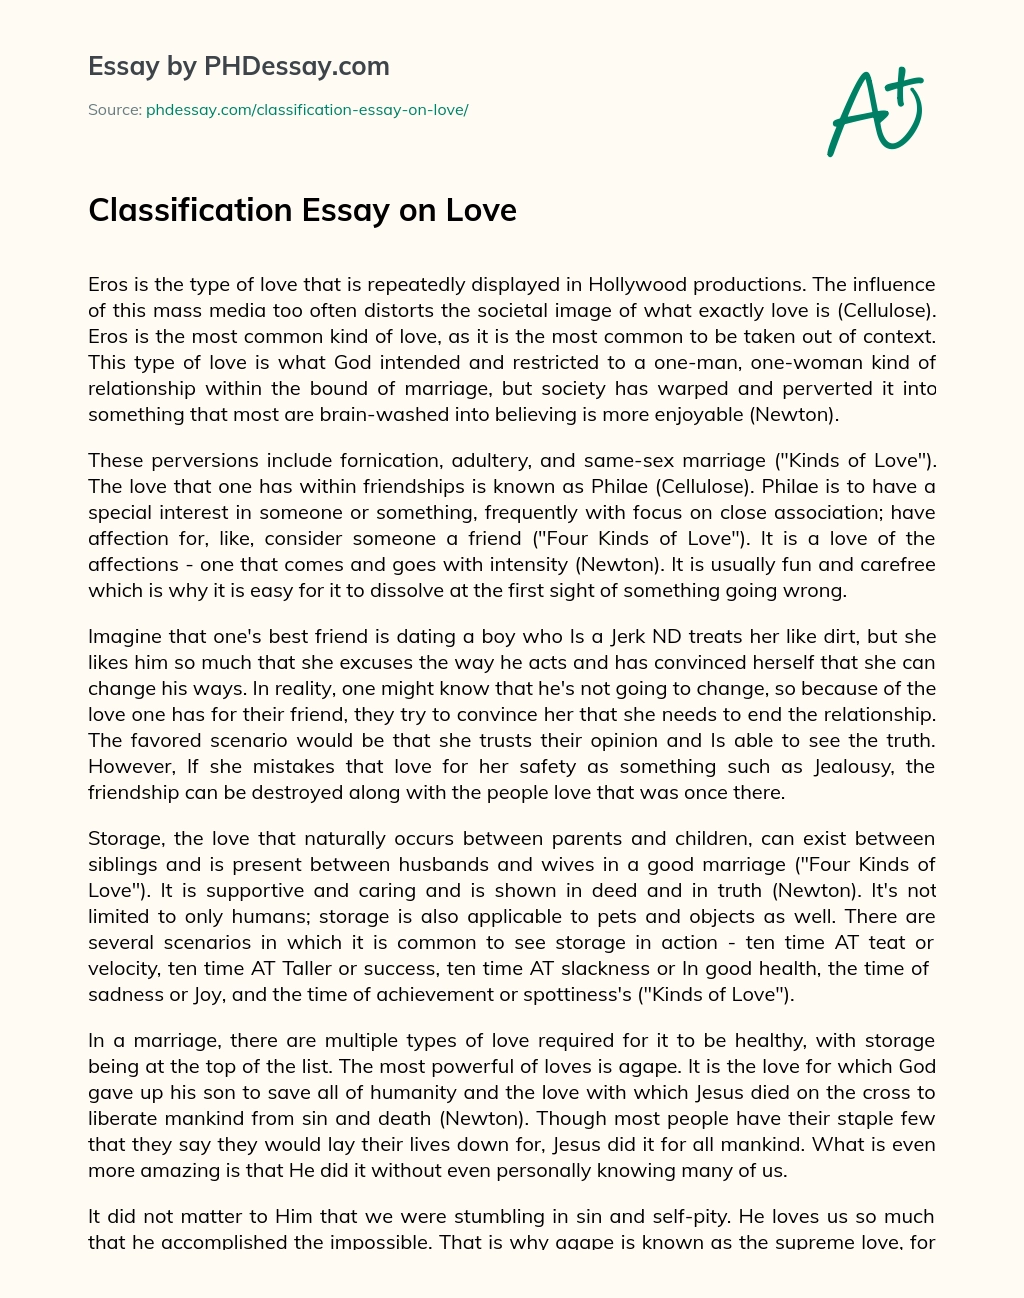 classification essay types of love